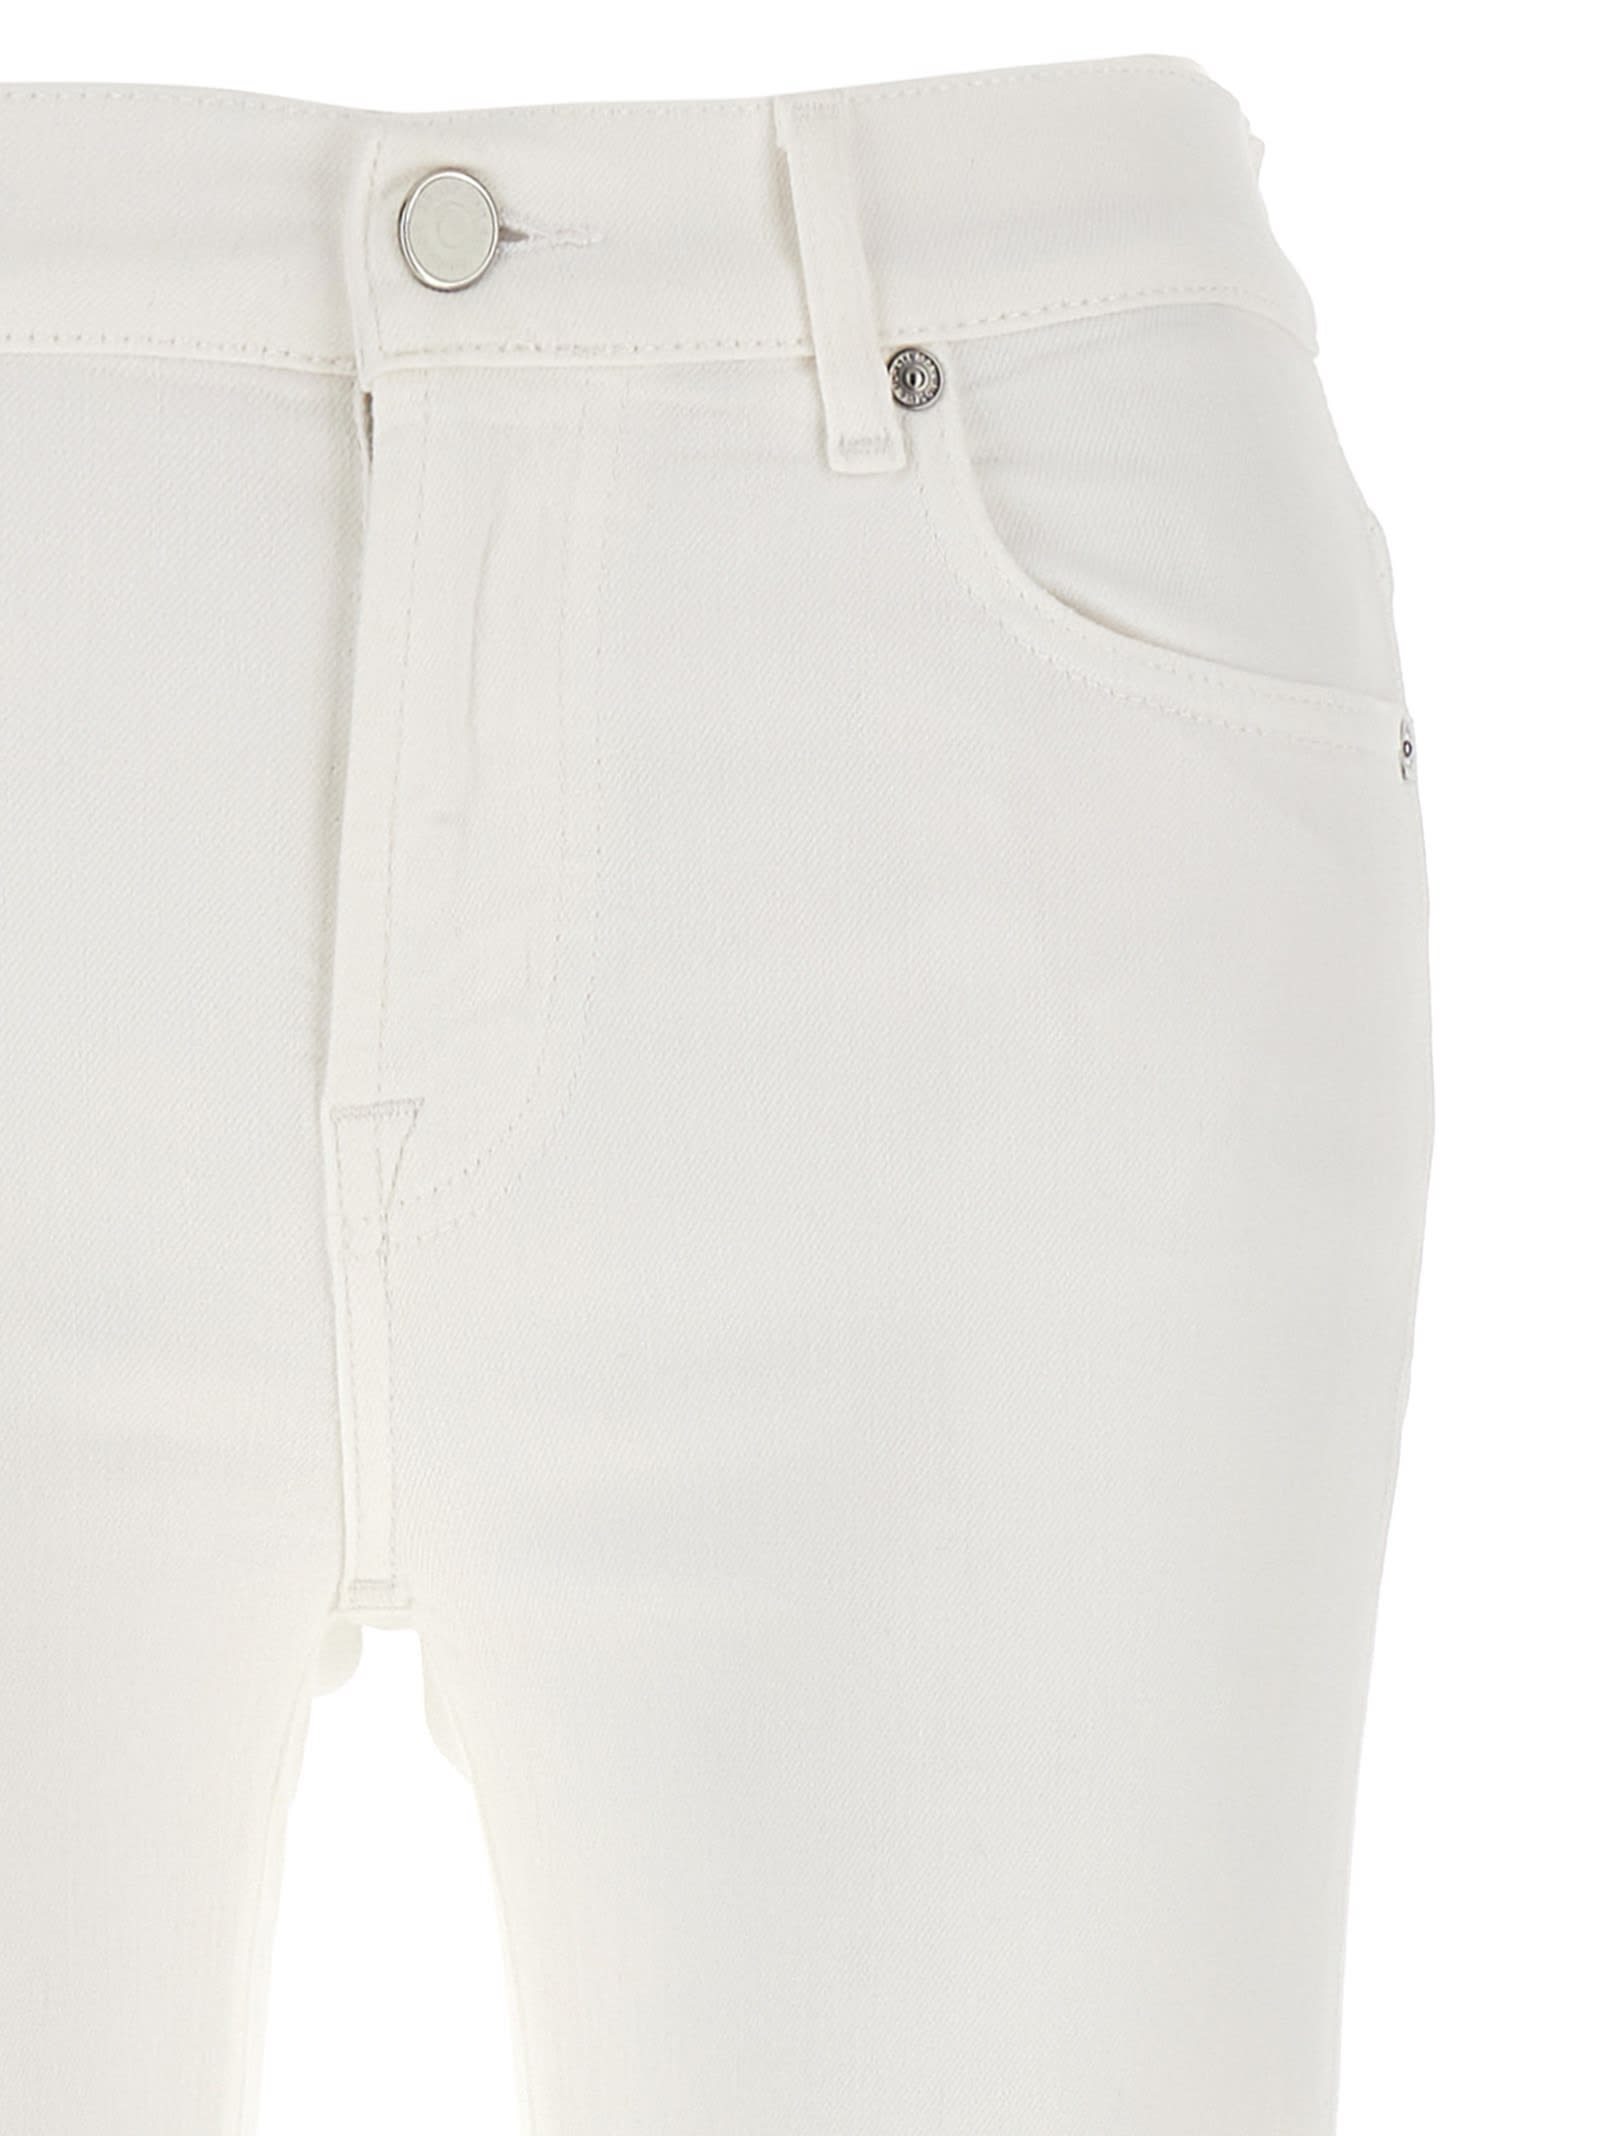 Shop 7 For All Mankind Bootcut Tailorless Jeans In White